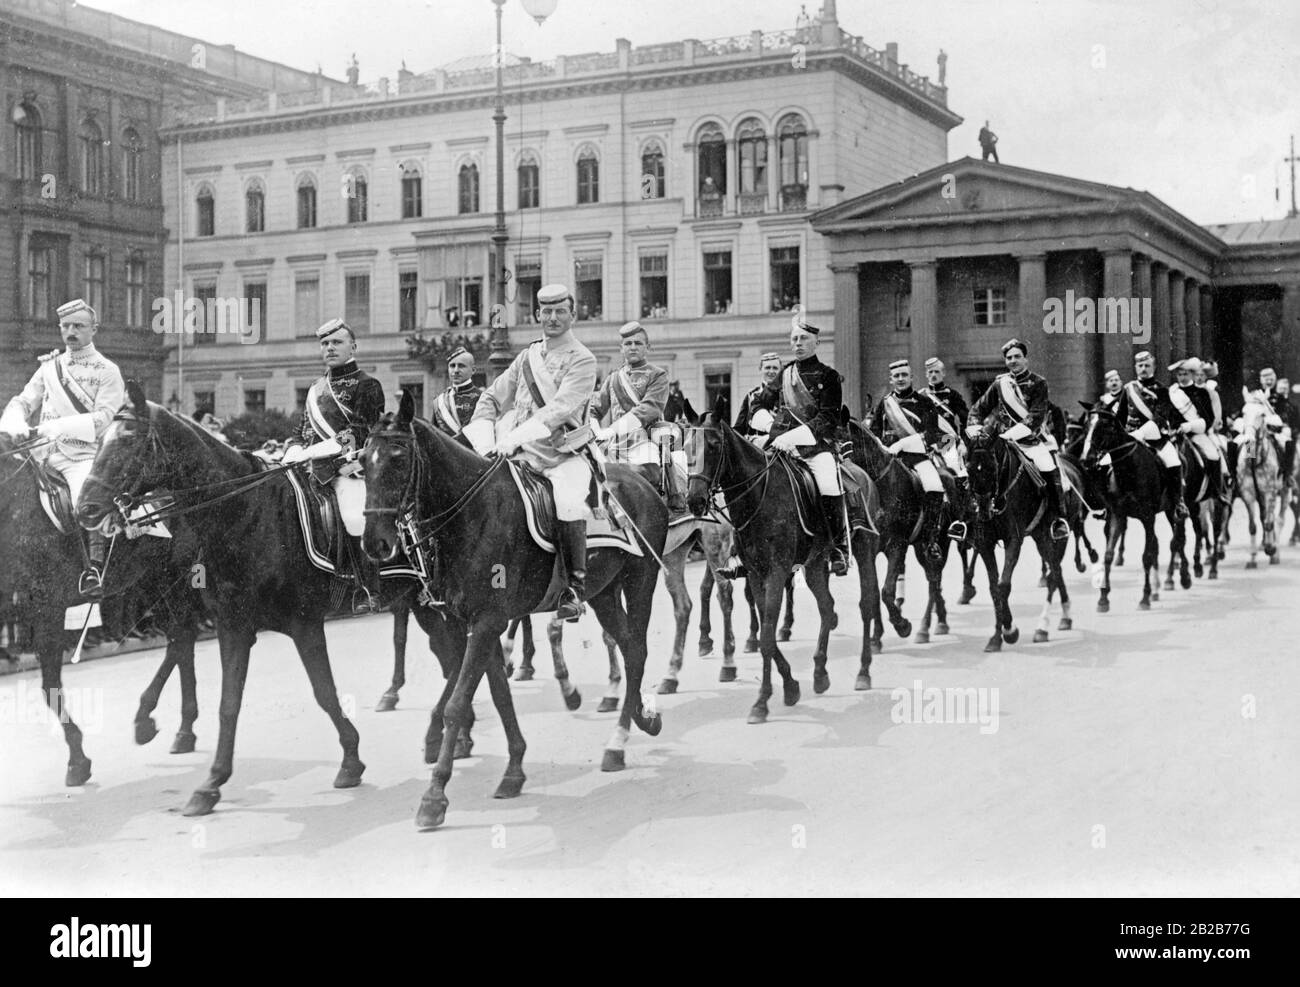 The Jahn celebration that took place in 1911 on the occasion of the 100th anniversary of the open-air gymnasium (German: Turnplatz) in the Hasenheide in Berlin. Students on horseback also take part in the procession. Stock Photo